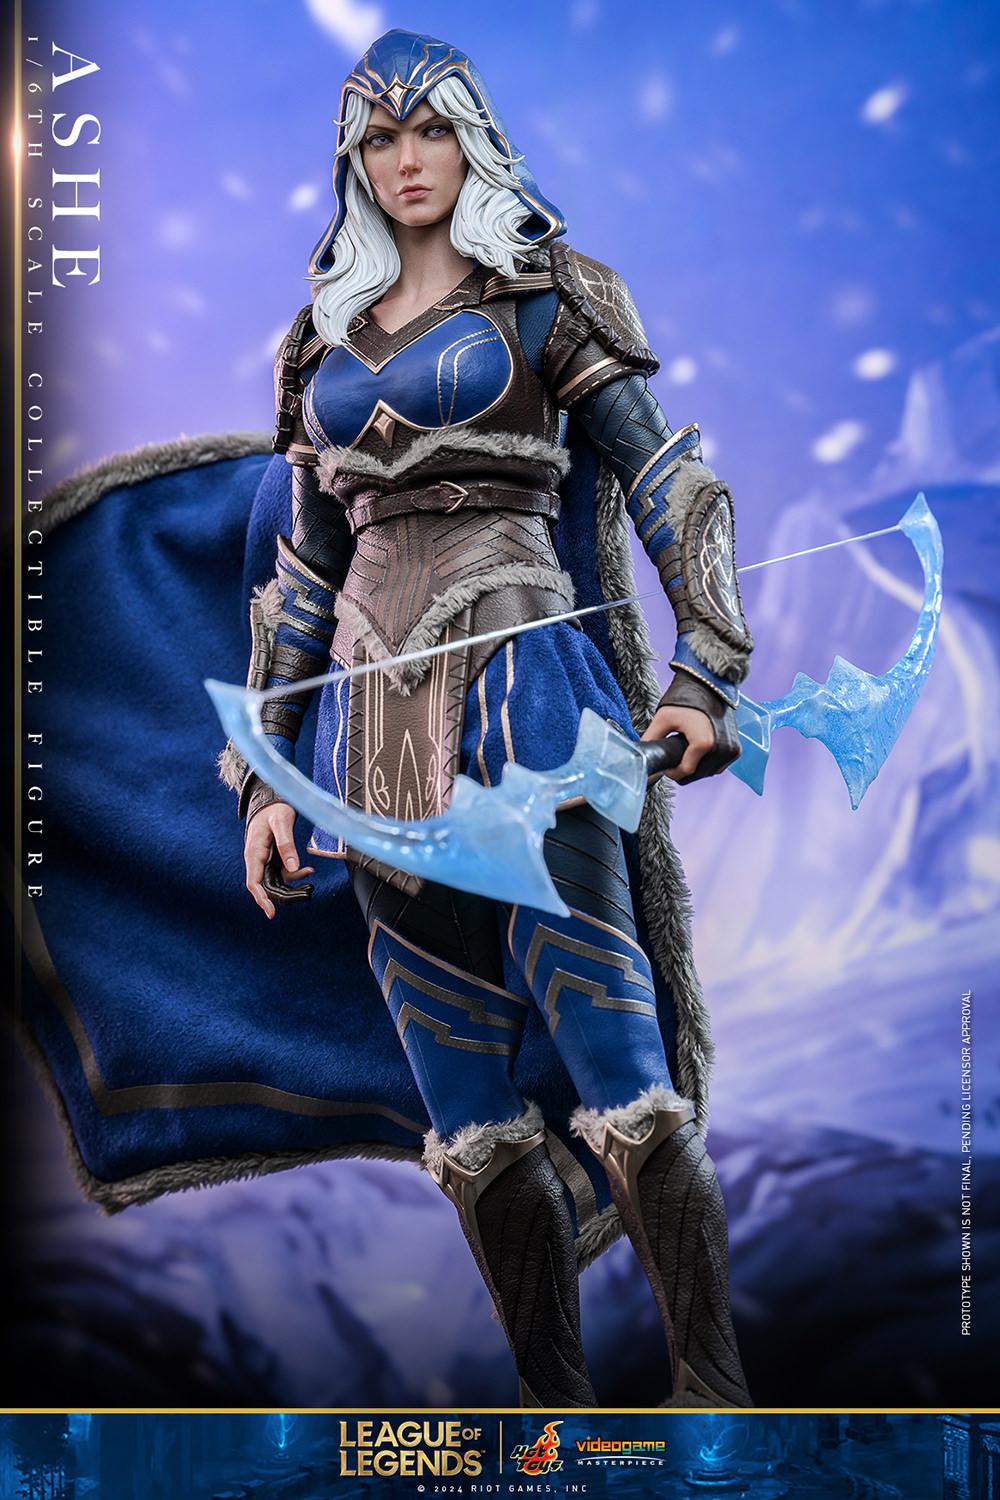 Pre-Order Hot Toys League of Legends Ashe Sixth Scale Figure VGM60